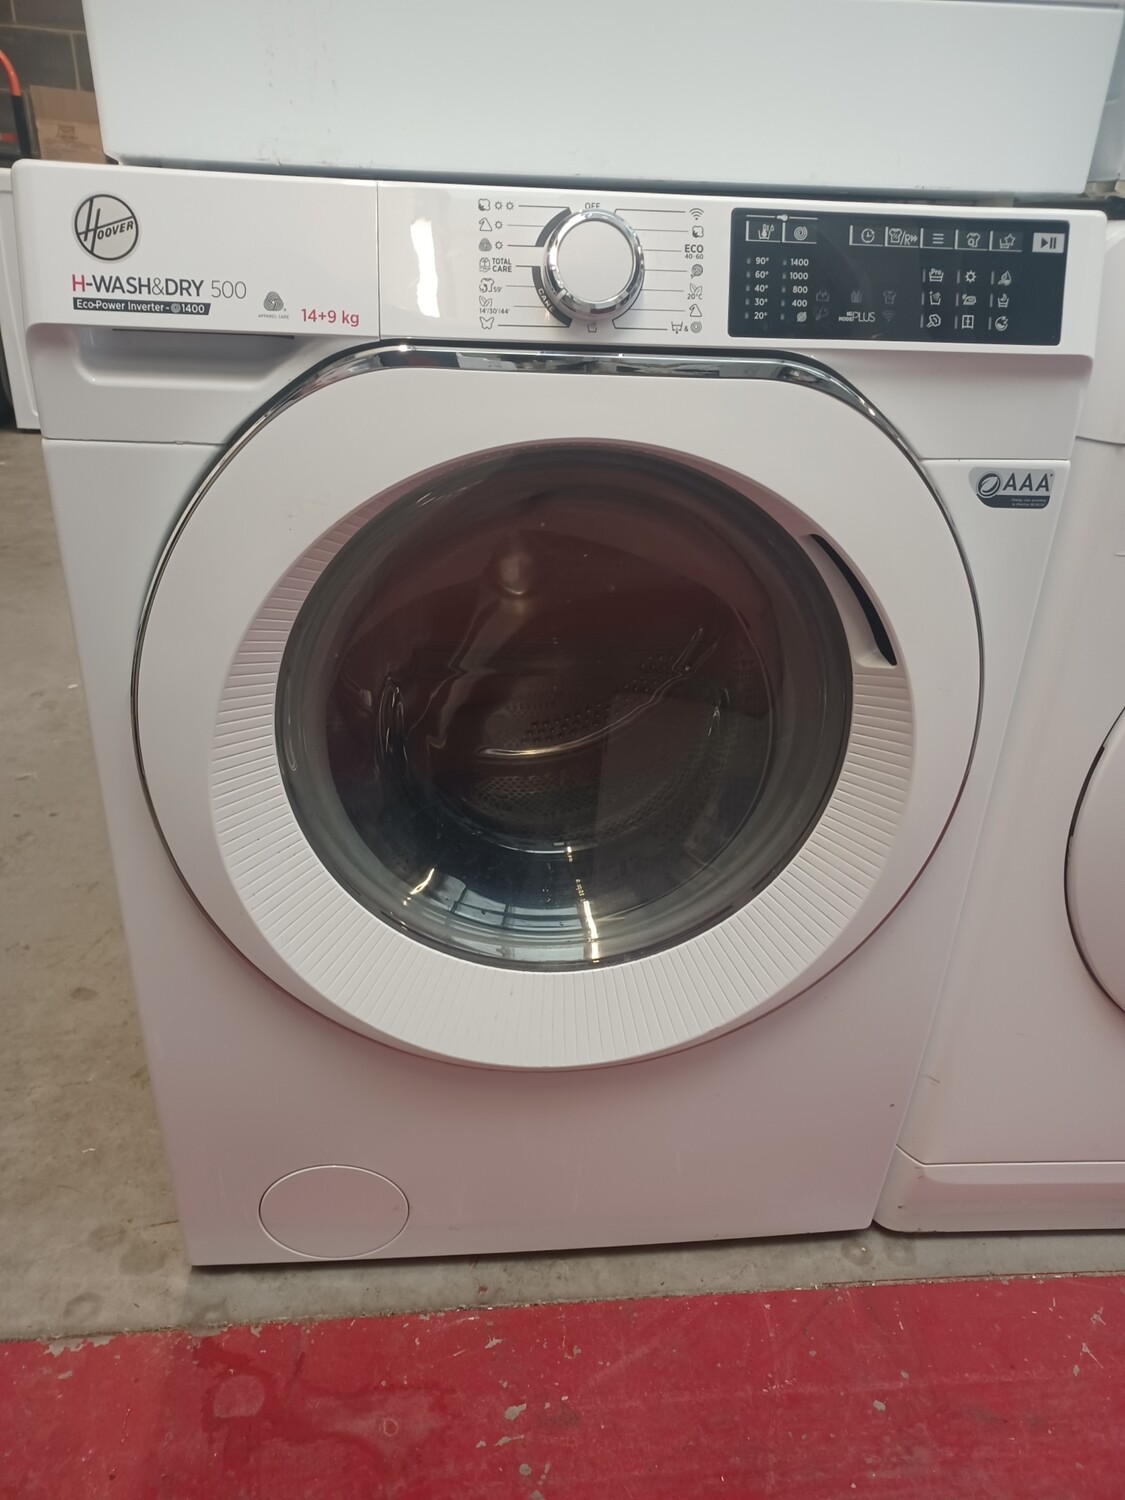 Hoover HD4149AMBCB 14+9KG 1400RPM WiFi White Washer Dryer
H-WASH&DRY 500 Refurbished - 12 Months Guarantee - H84 W59.5 D70cm